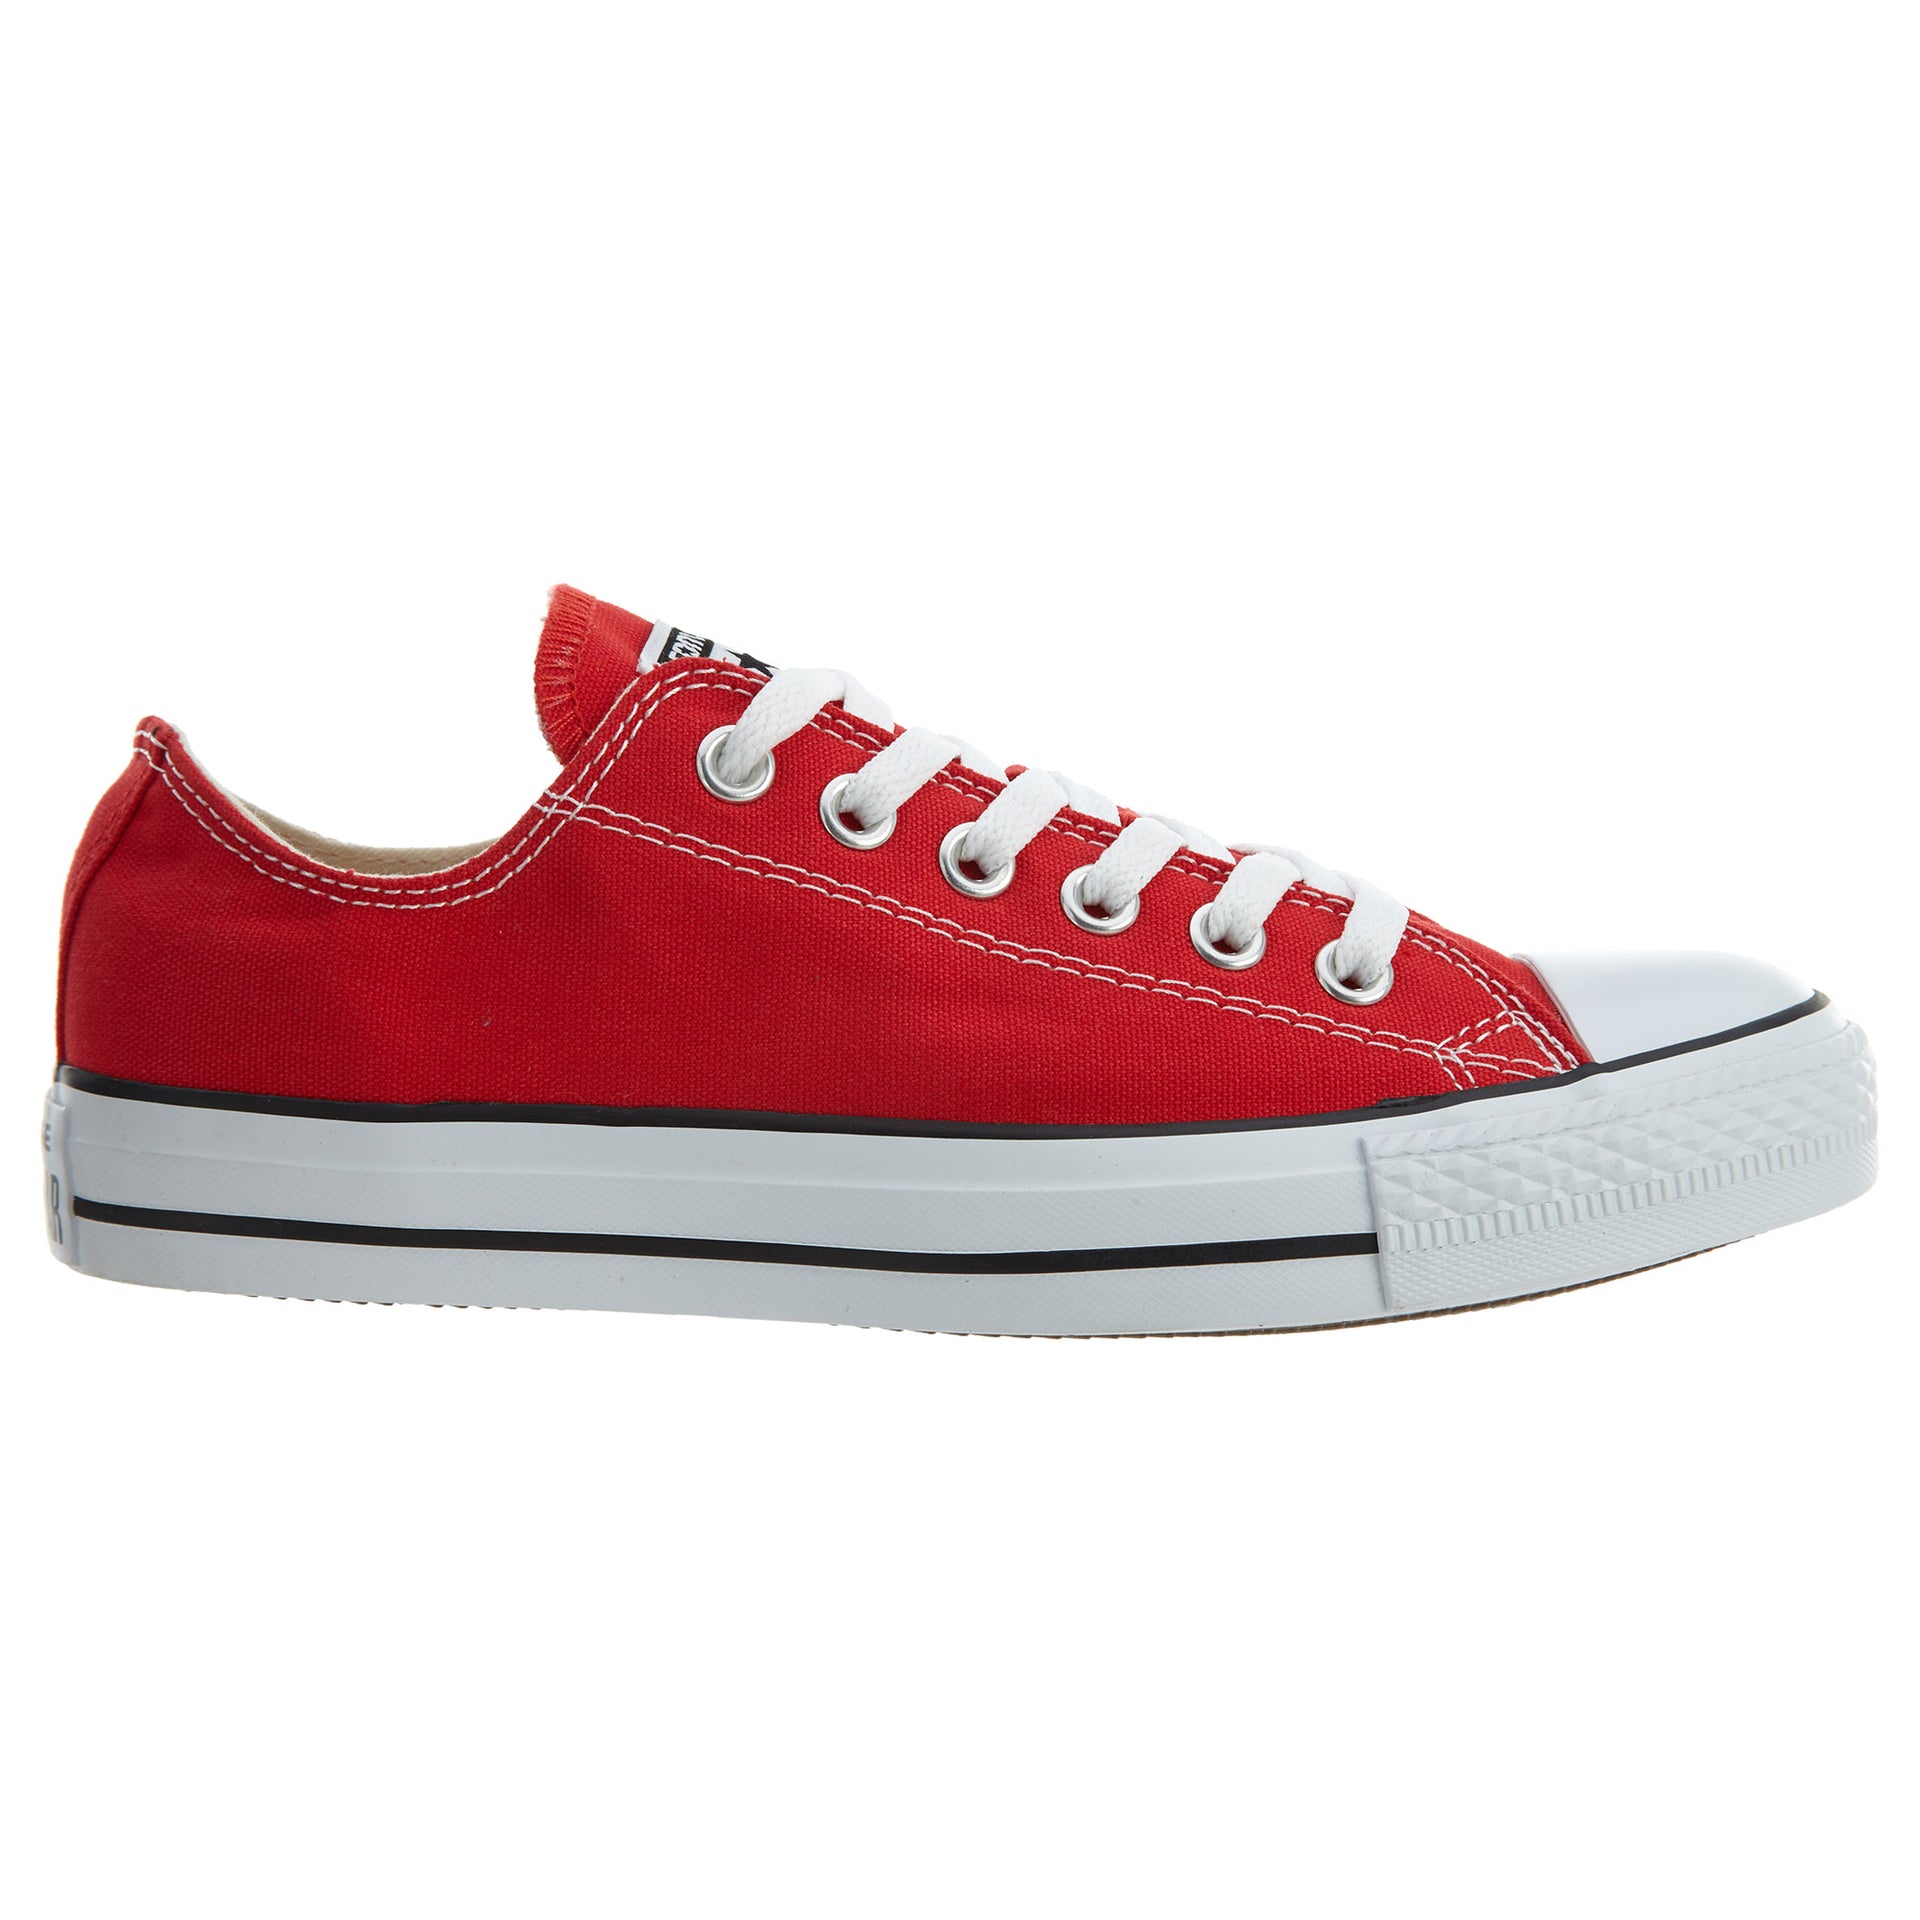 Converse Chuck Taylor All Star Core Ox Unisex Style : M9696c